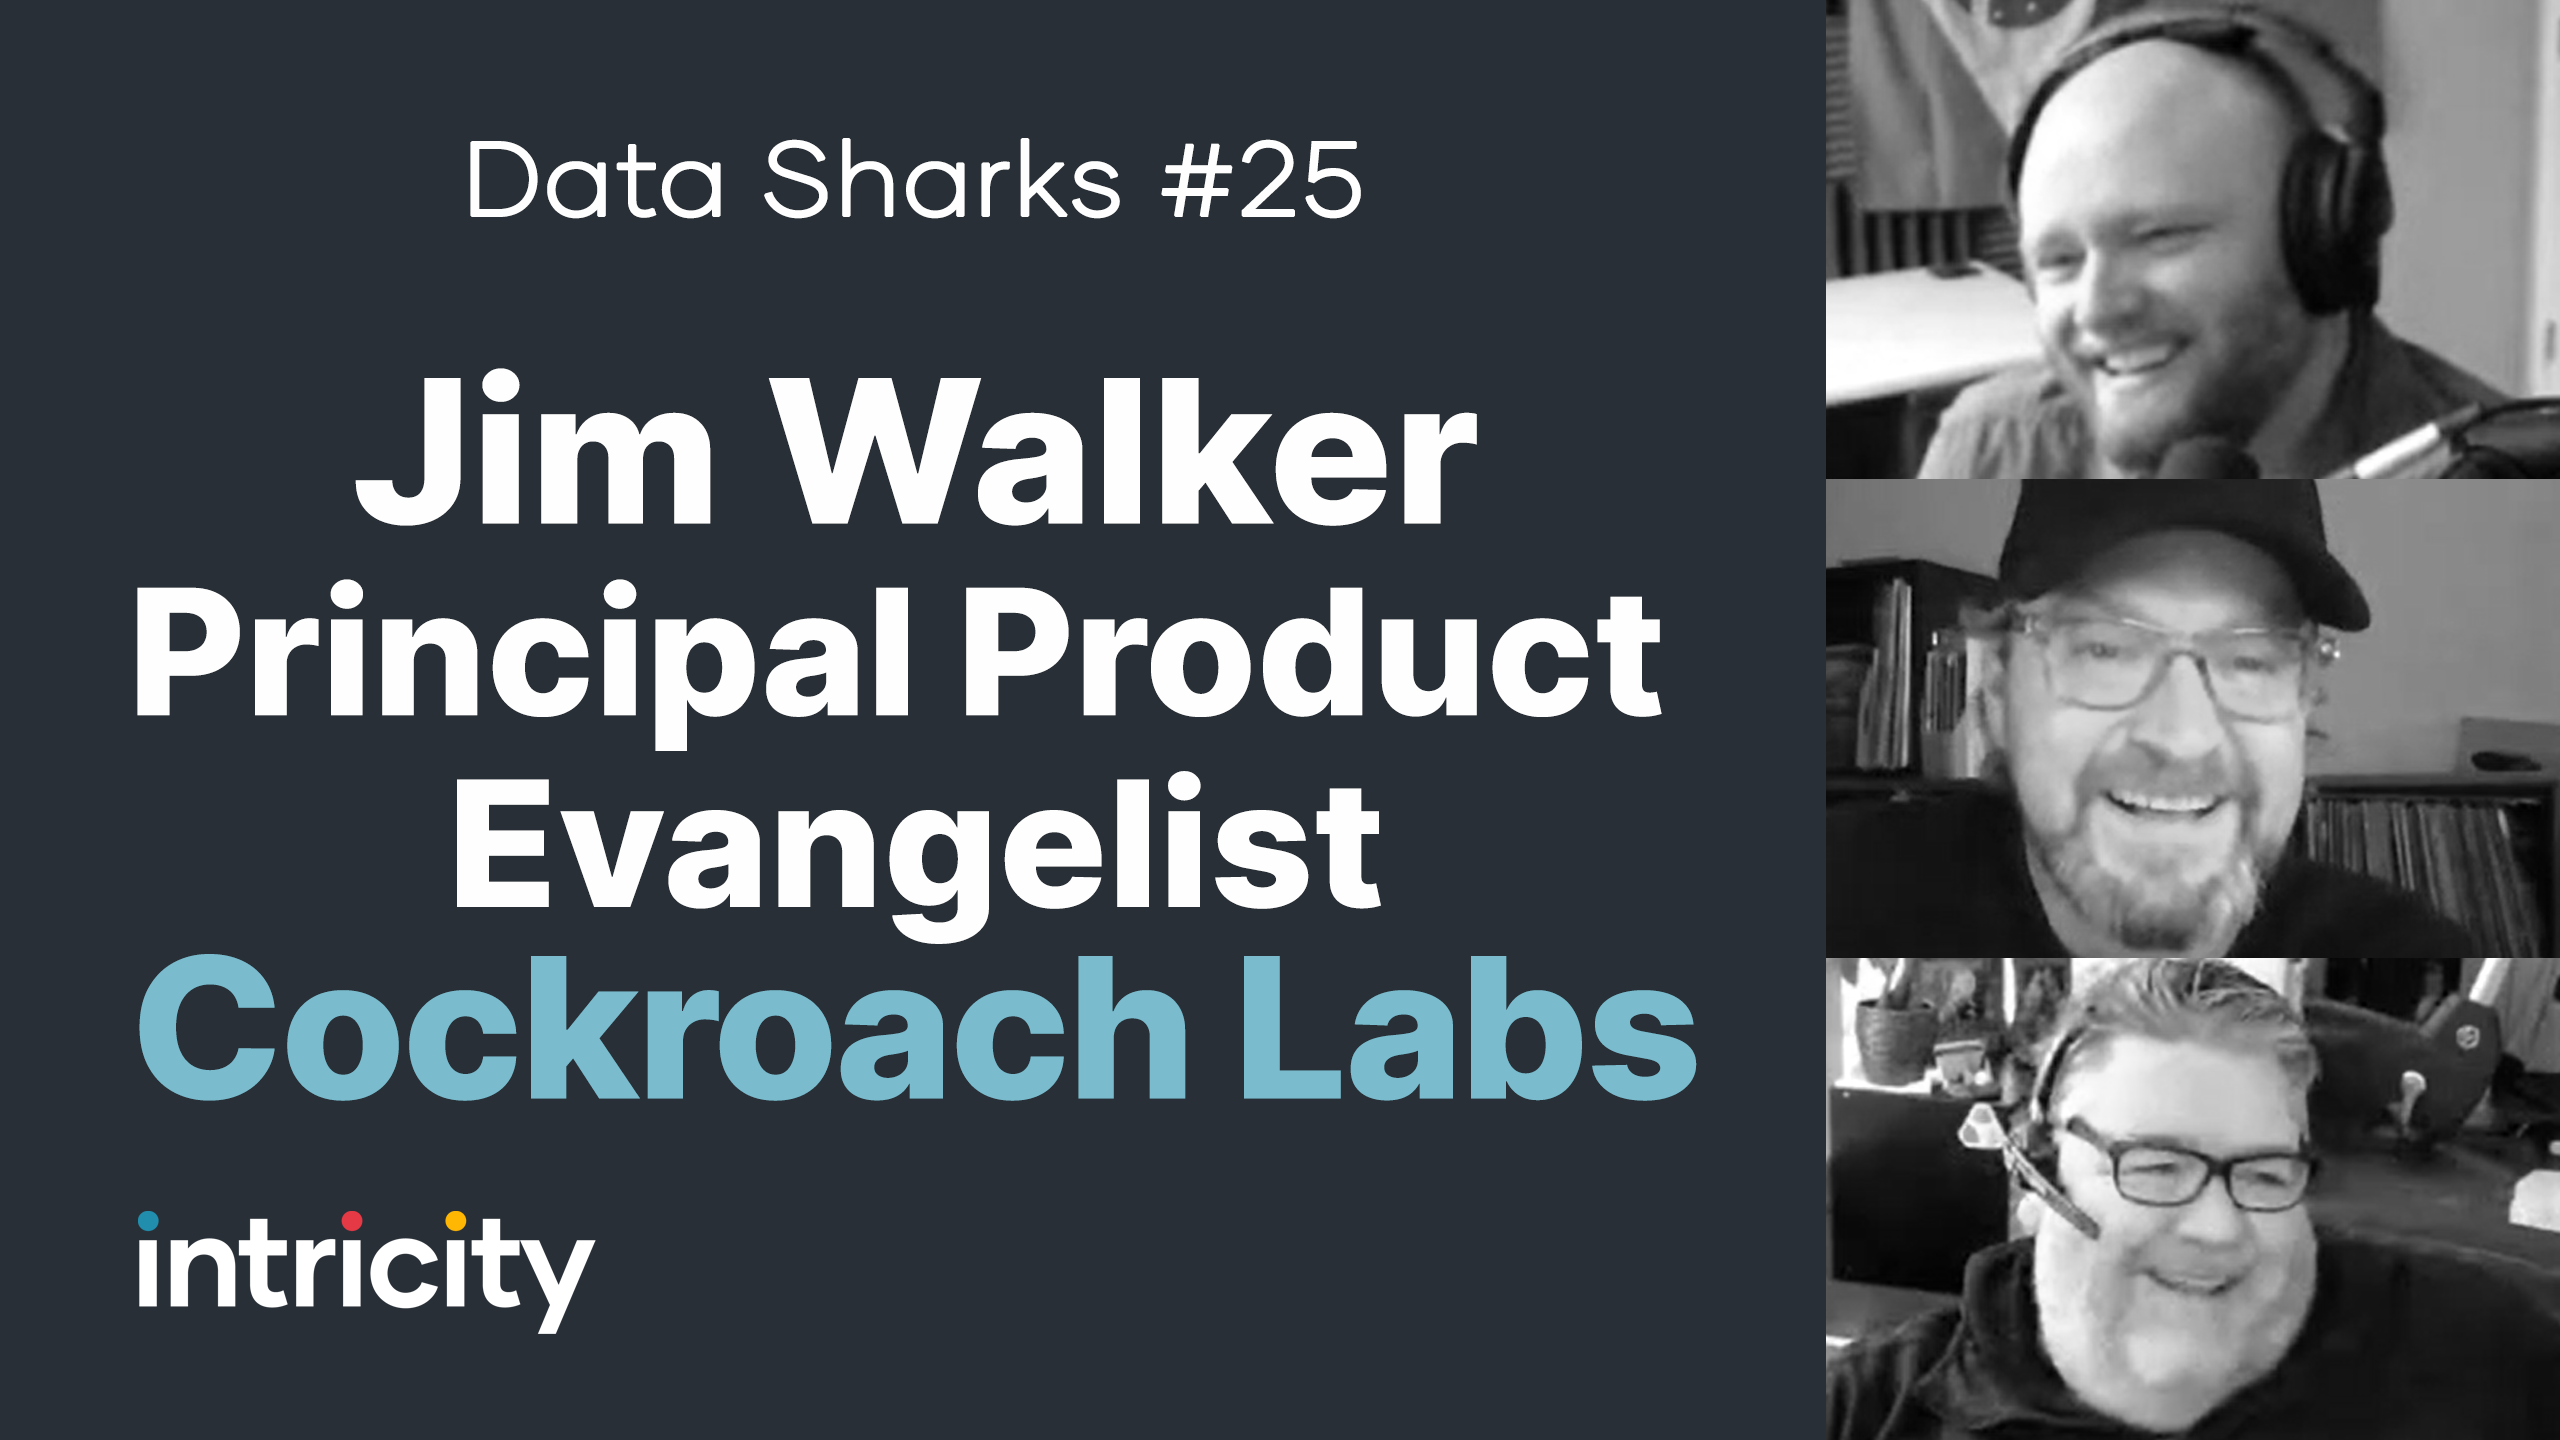 Data Sharks #25: Jim Walker with Cockroach Labs